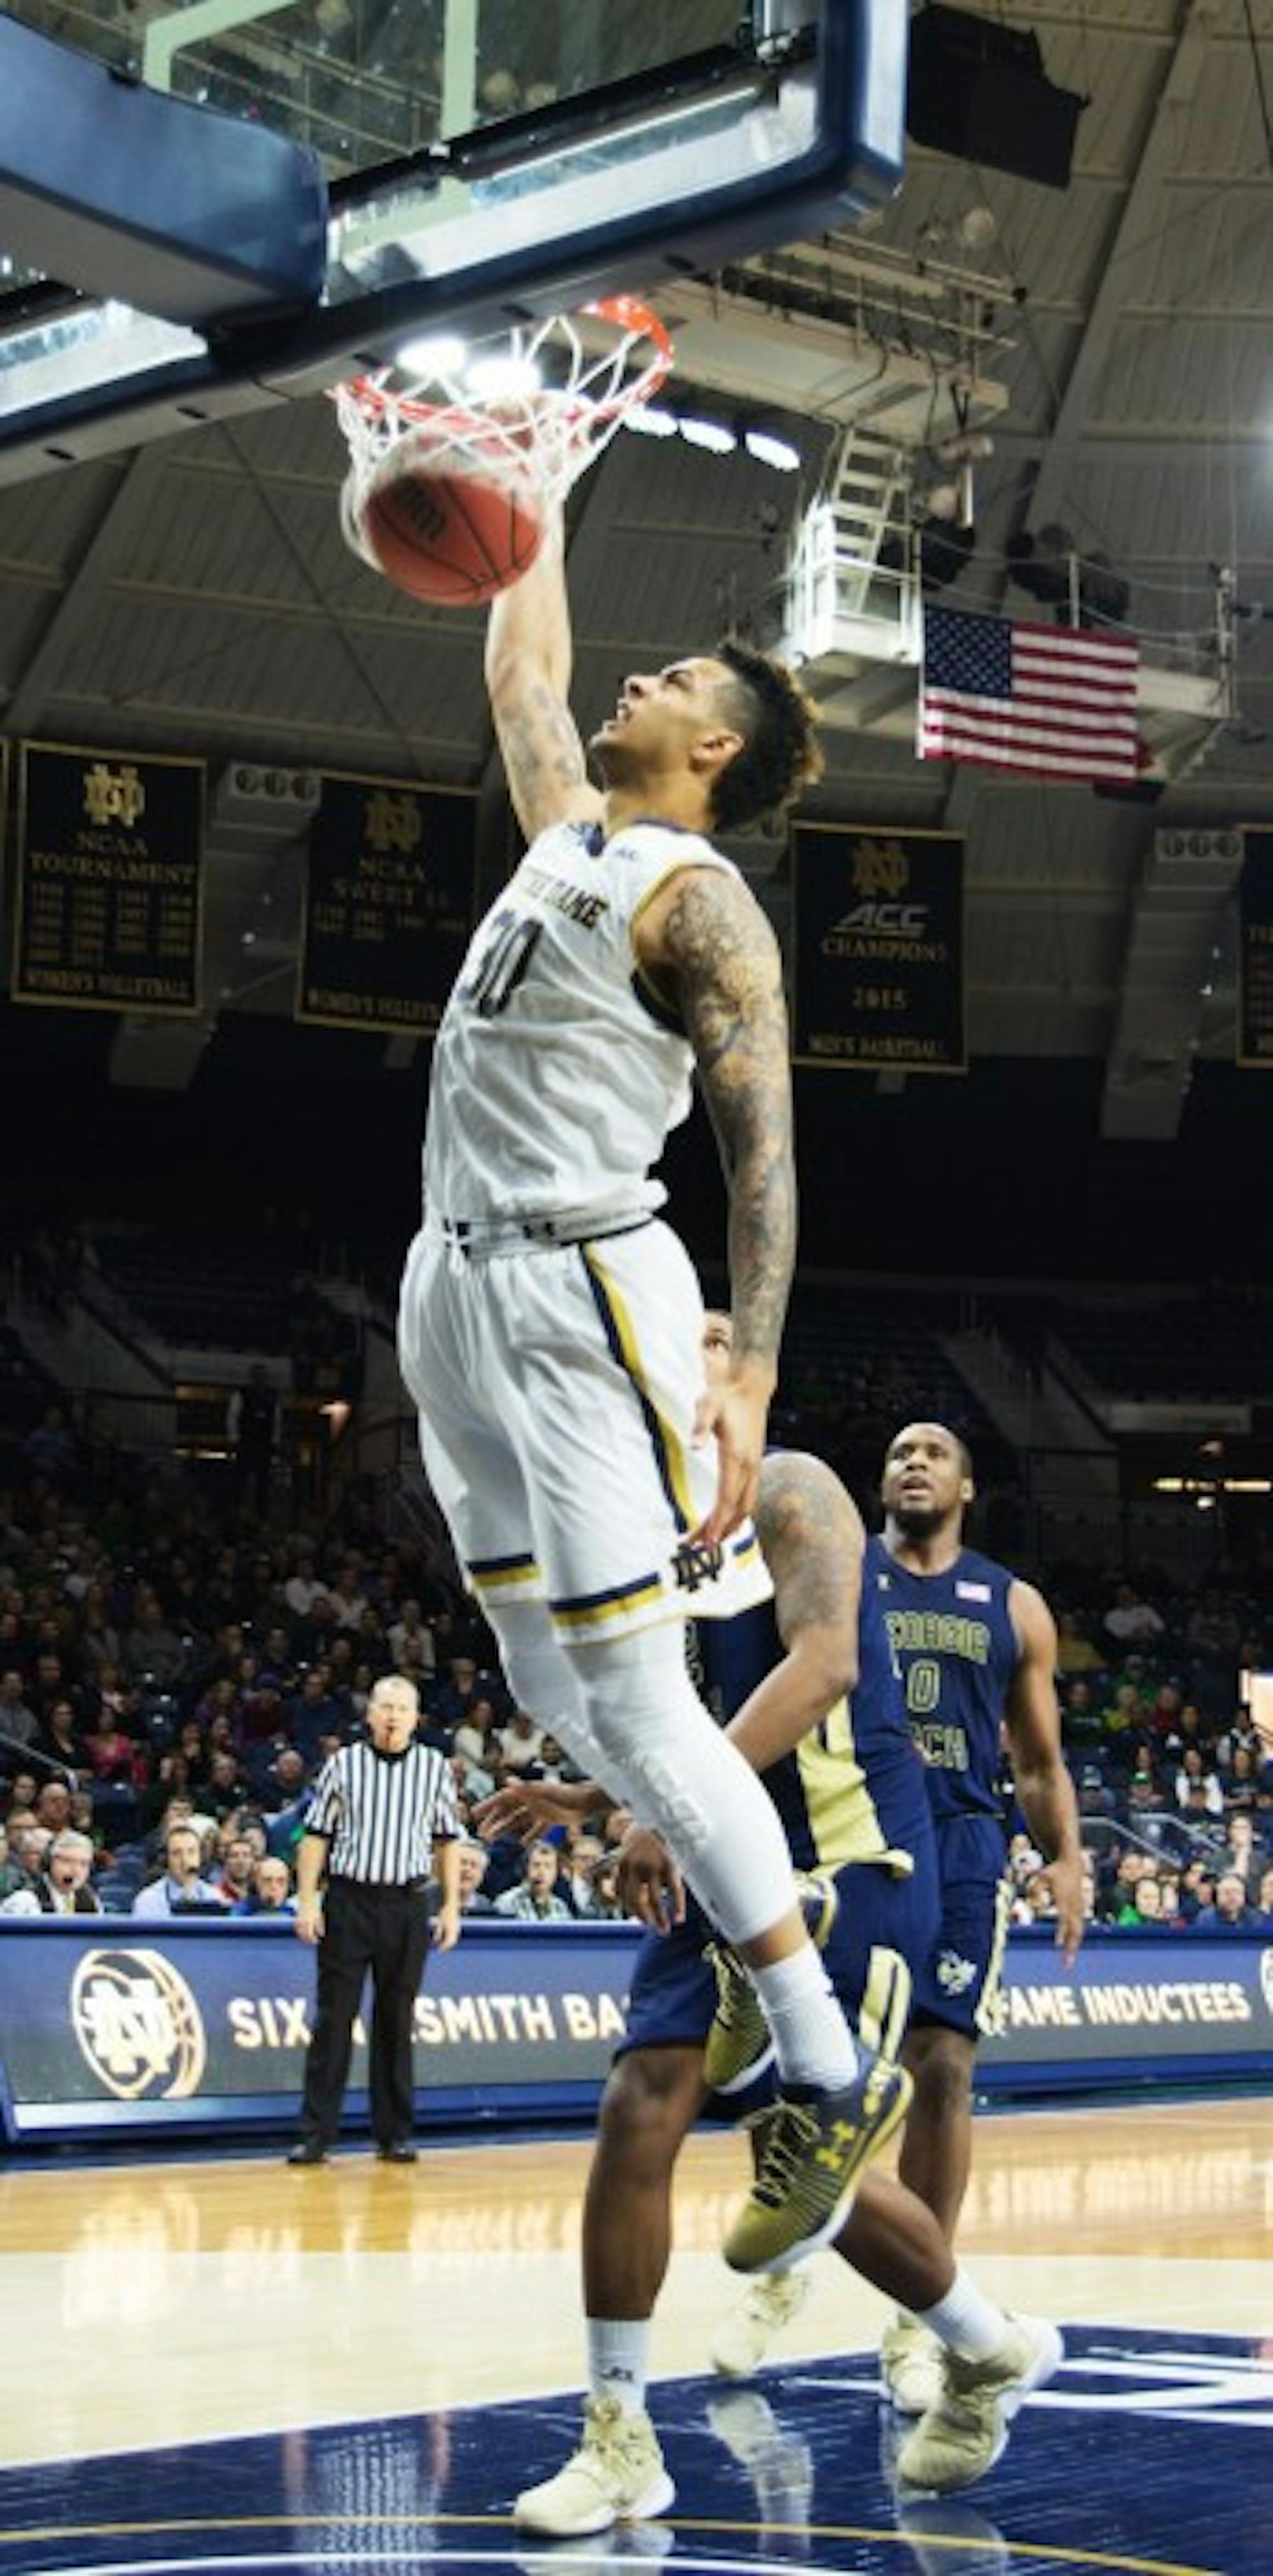 Irish senior forward Zach Auguste dunks during Notre Dame’s 72-64 win over Georgia Tech on Jan. 20 at Purcell Pavilion.